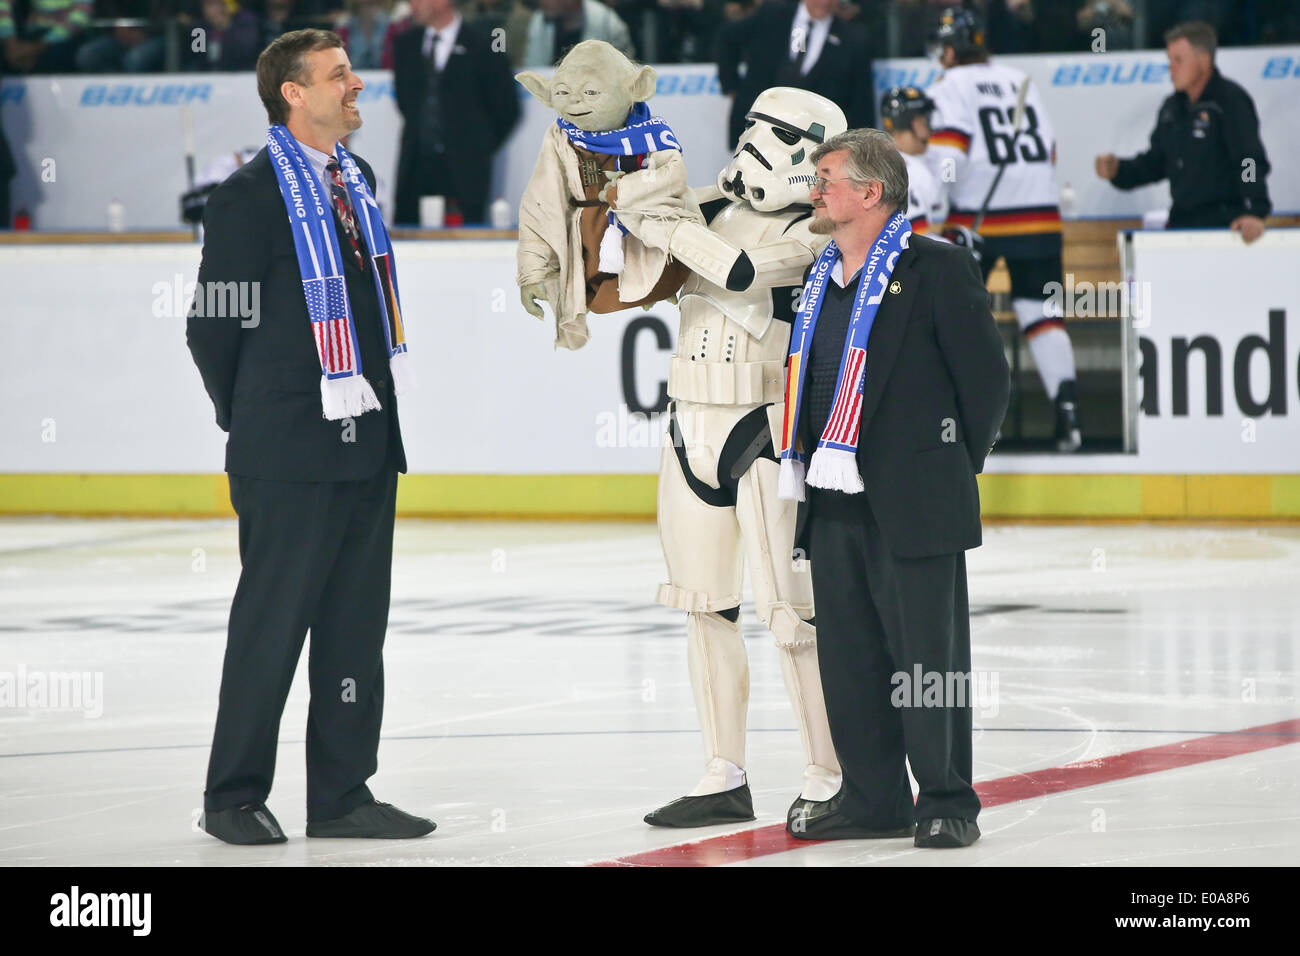 Nuremberg, Germany. 06th May, 2014. US consul general in Munich, Bill Moeller (L-R) stands on the ice with a man in a Star Wars Stormtrooper costume who holds up a Yoda Star Wars puppet and the inventor of the Yoda figure Nick Malesy prior to the ice hockey friendly match Germany vs USA in Nuremberg, Germany, 06 May 2014. Photo: DANIEL KARMANN/dpa/Alamy Live News Stock Photo